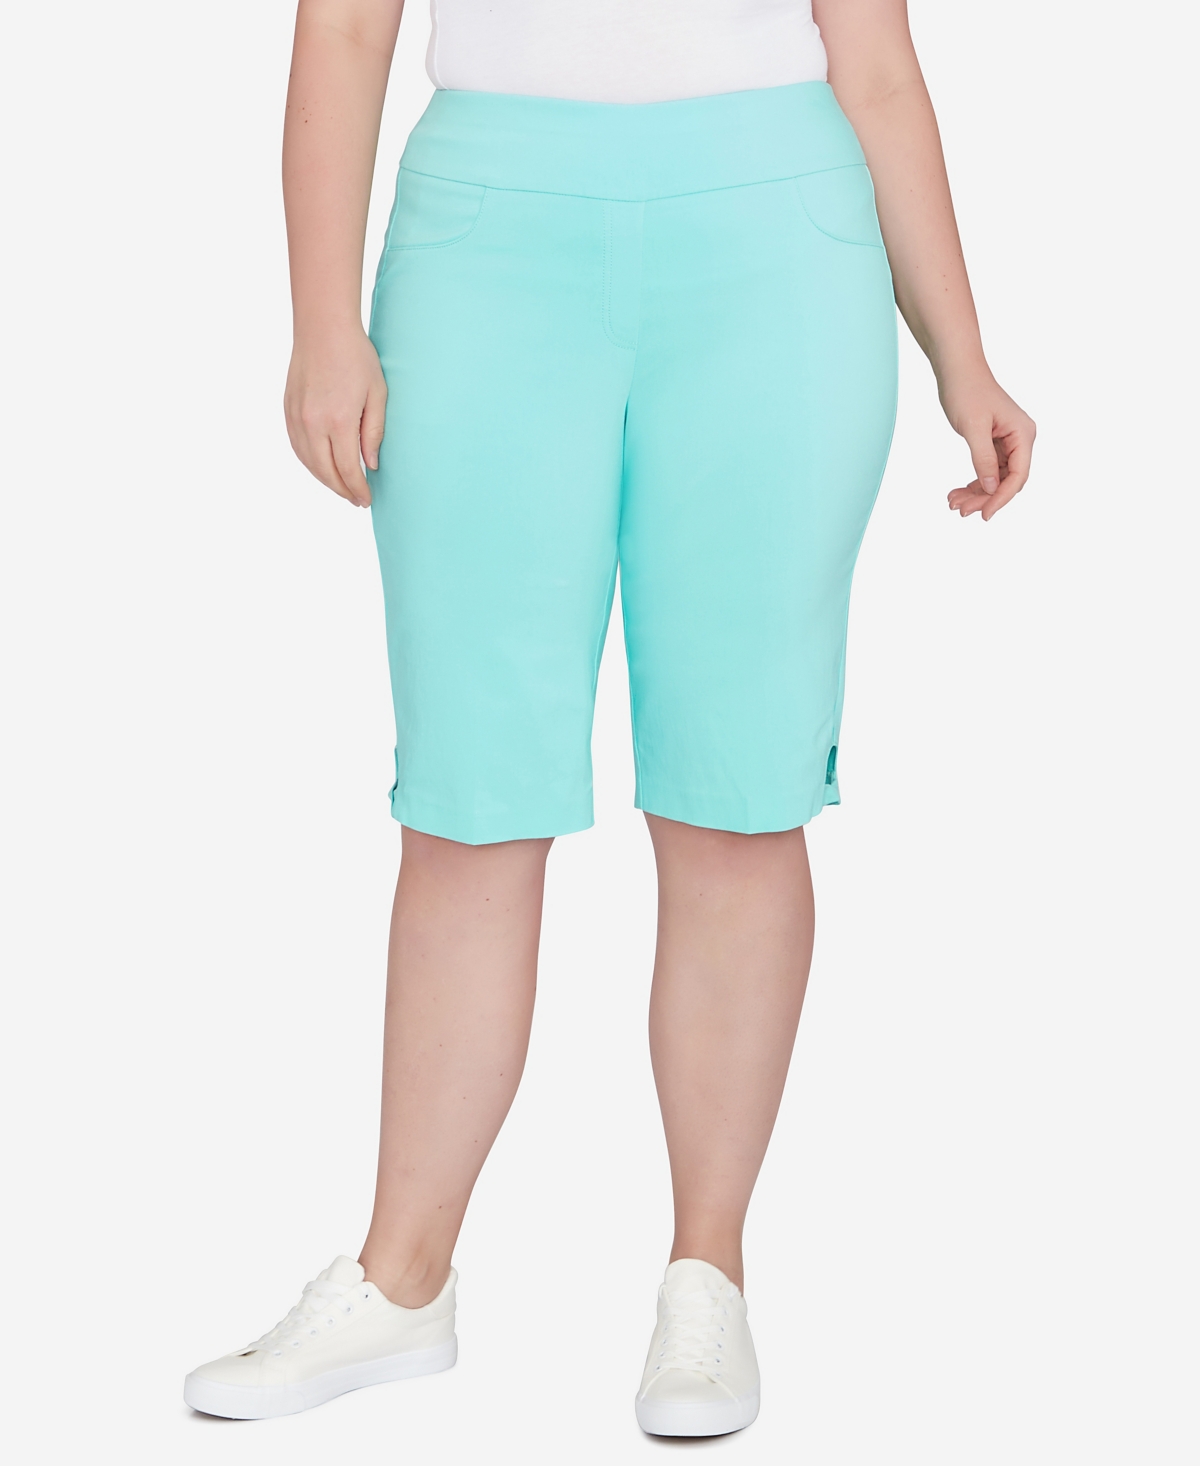 Plus Size Spring Into Action Solid Tech Stretch Skimmer Pant - Mint